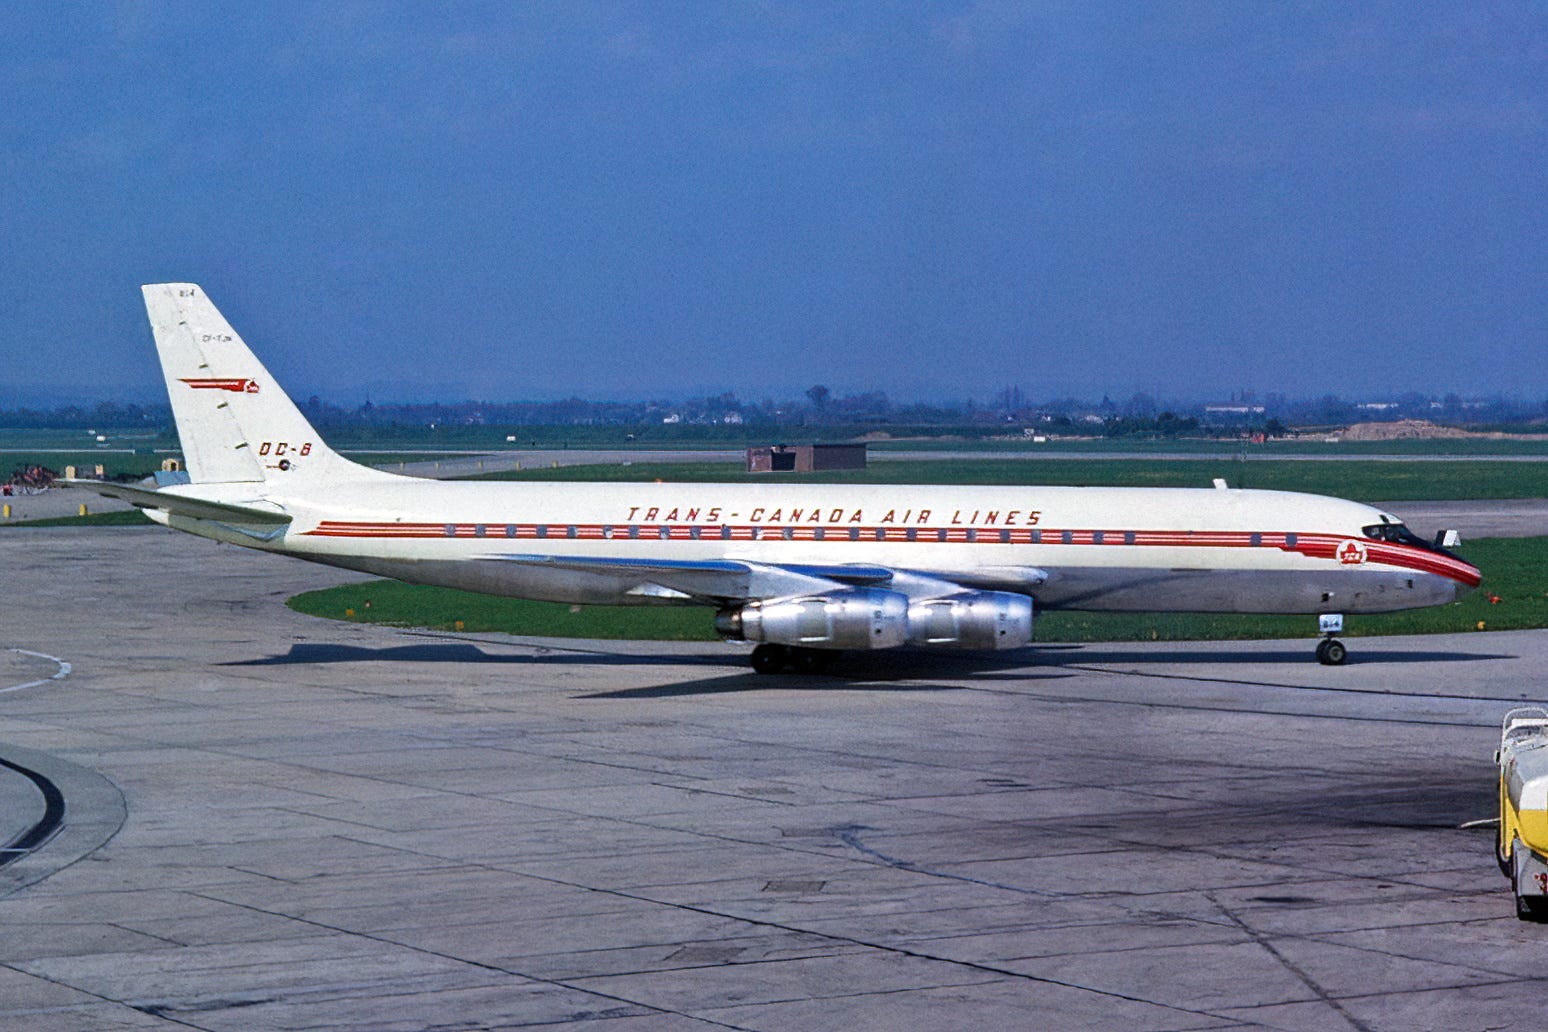 A Forgotten Terrifying Dive: The Story of Trans-Canada Air Lines Fligh